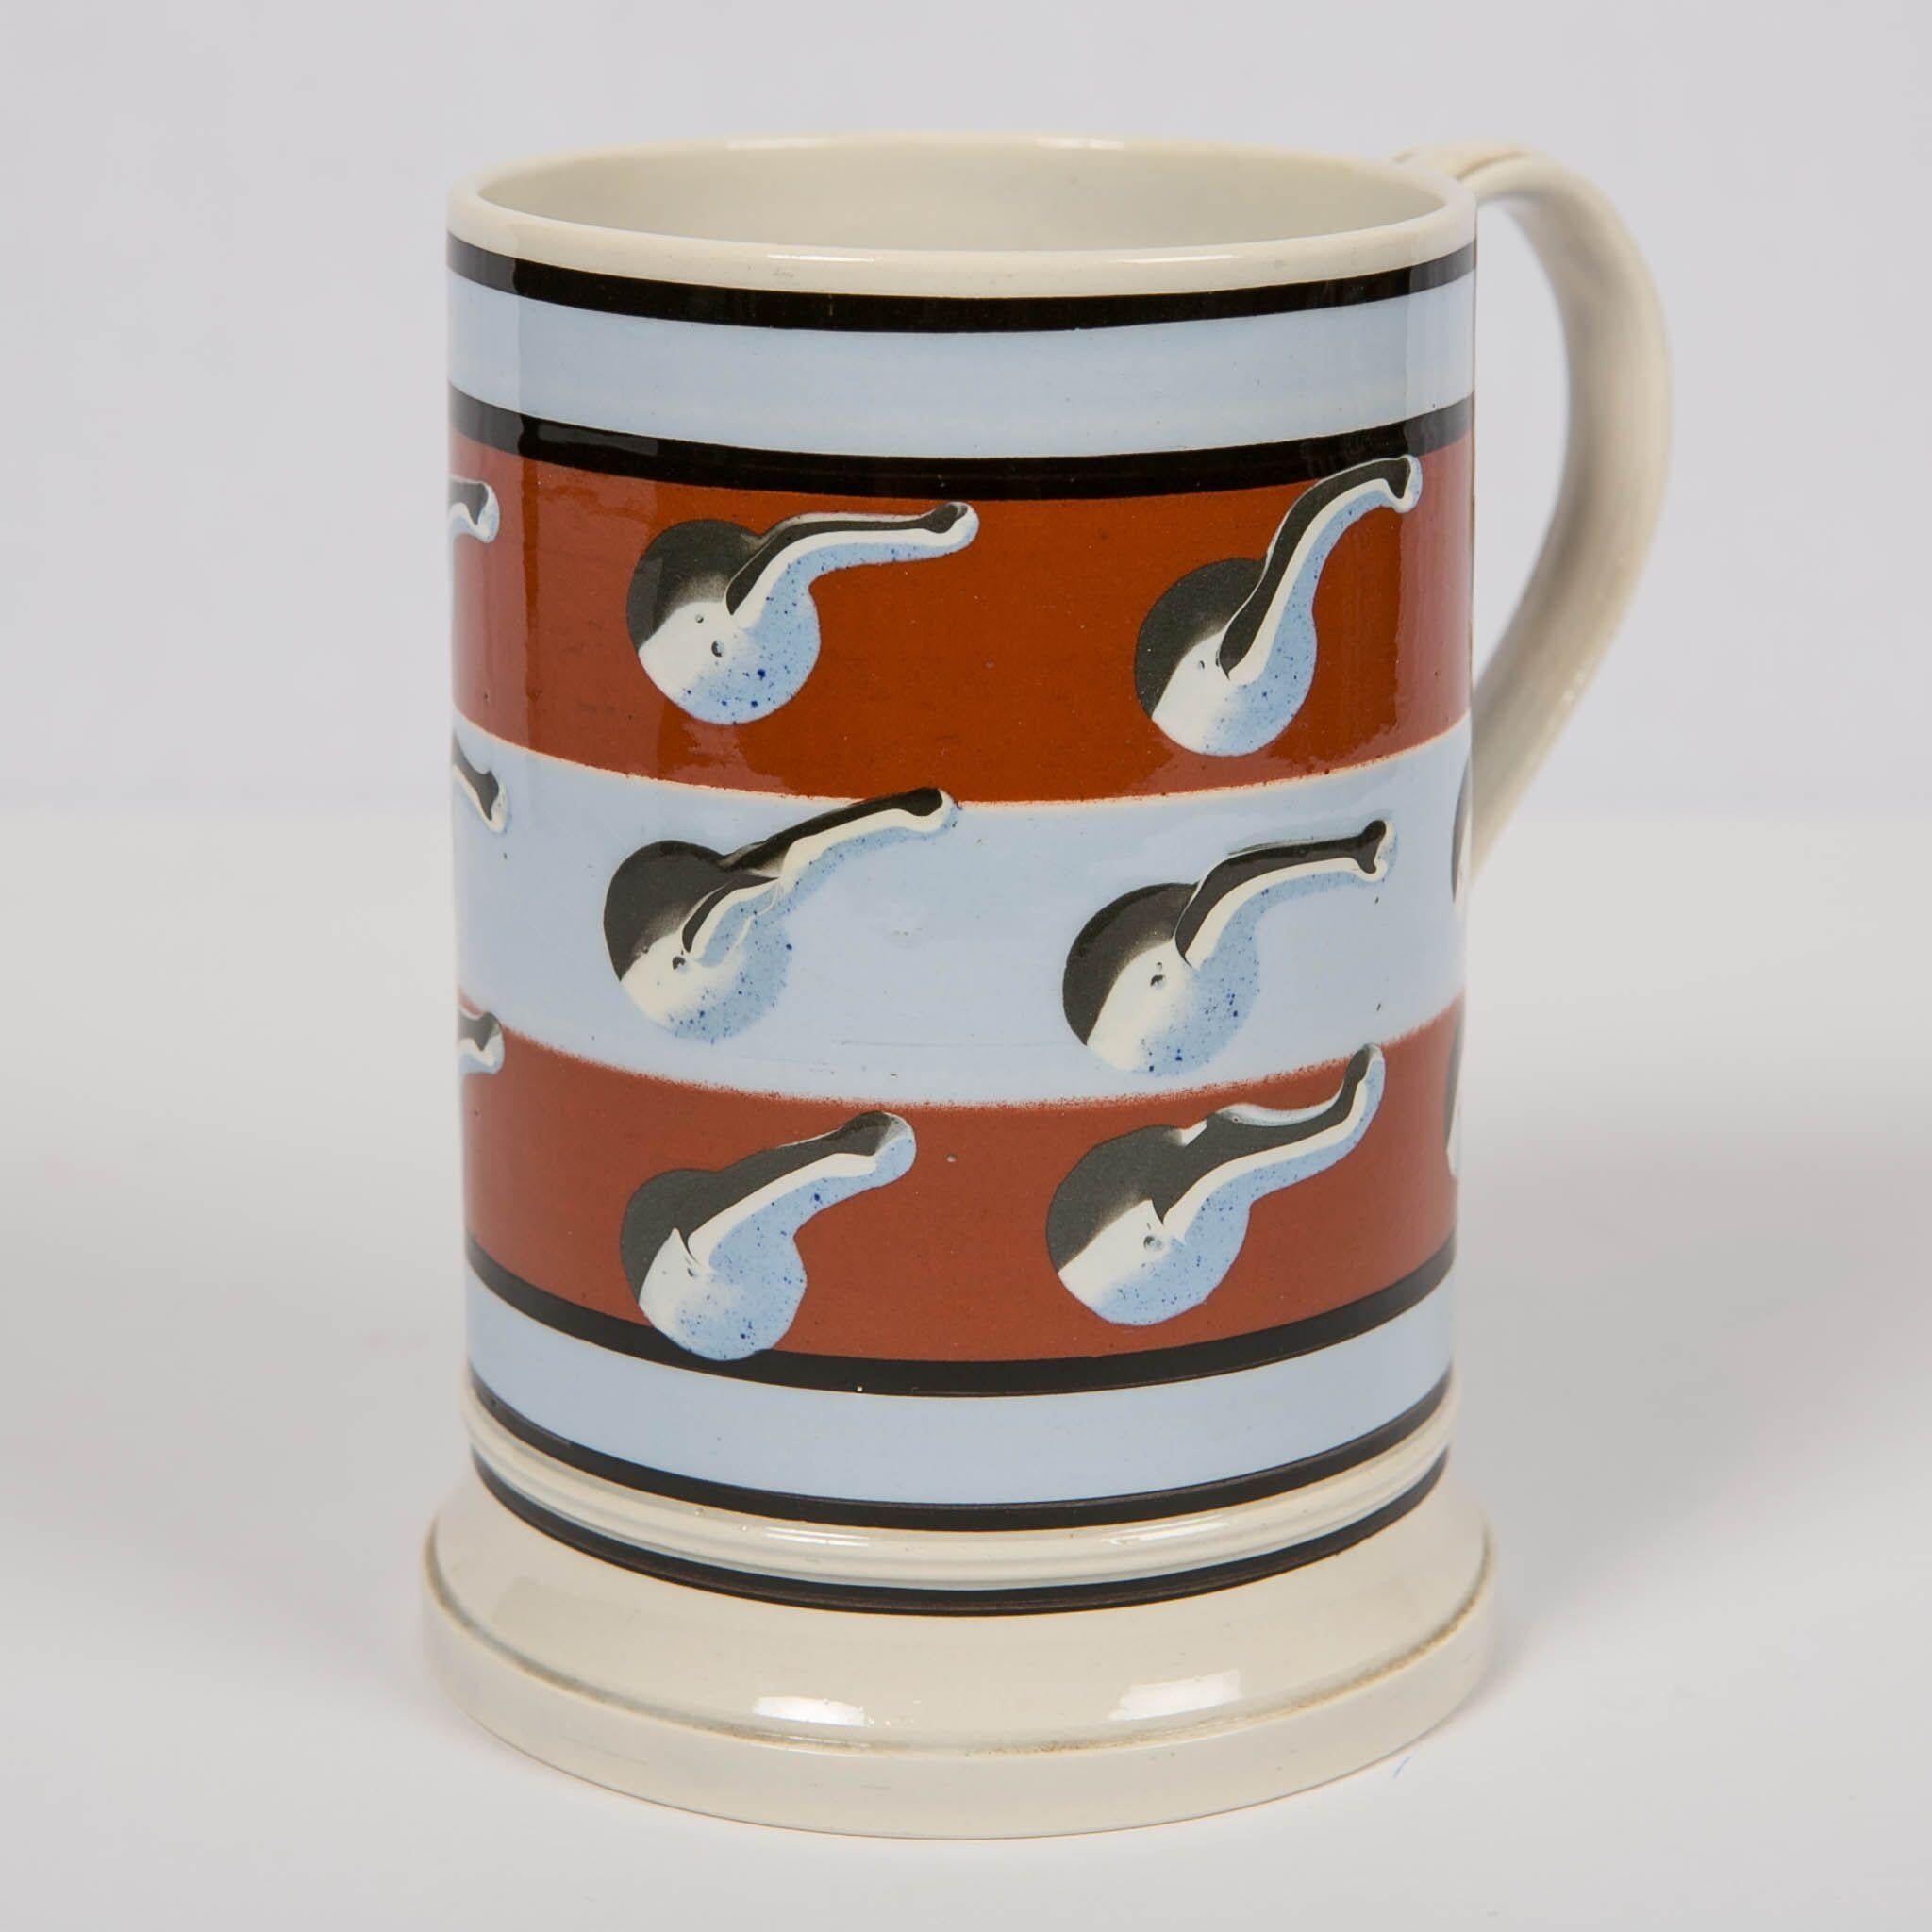 This beautiful mochaware mug was created by Don Carpentier at the end of the 20th century. Don dedicated himself to reviving the art of making mochaware. Mochaware is turned on a lathe. In order to make the pieces with the original techniques